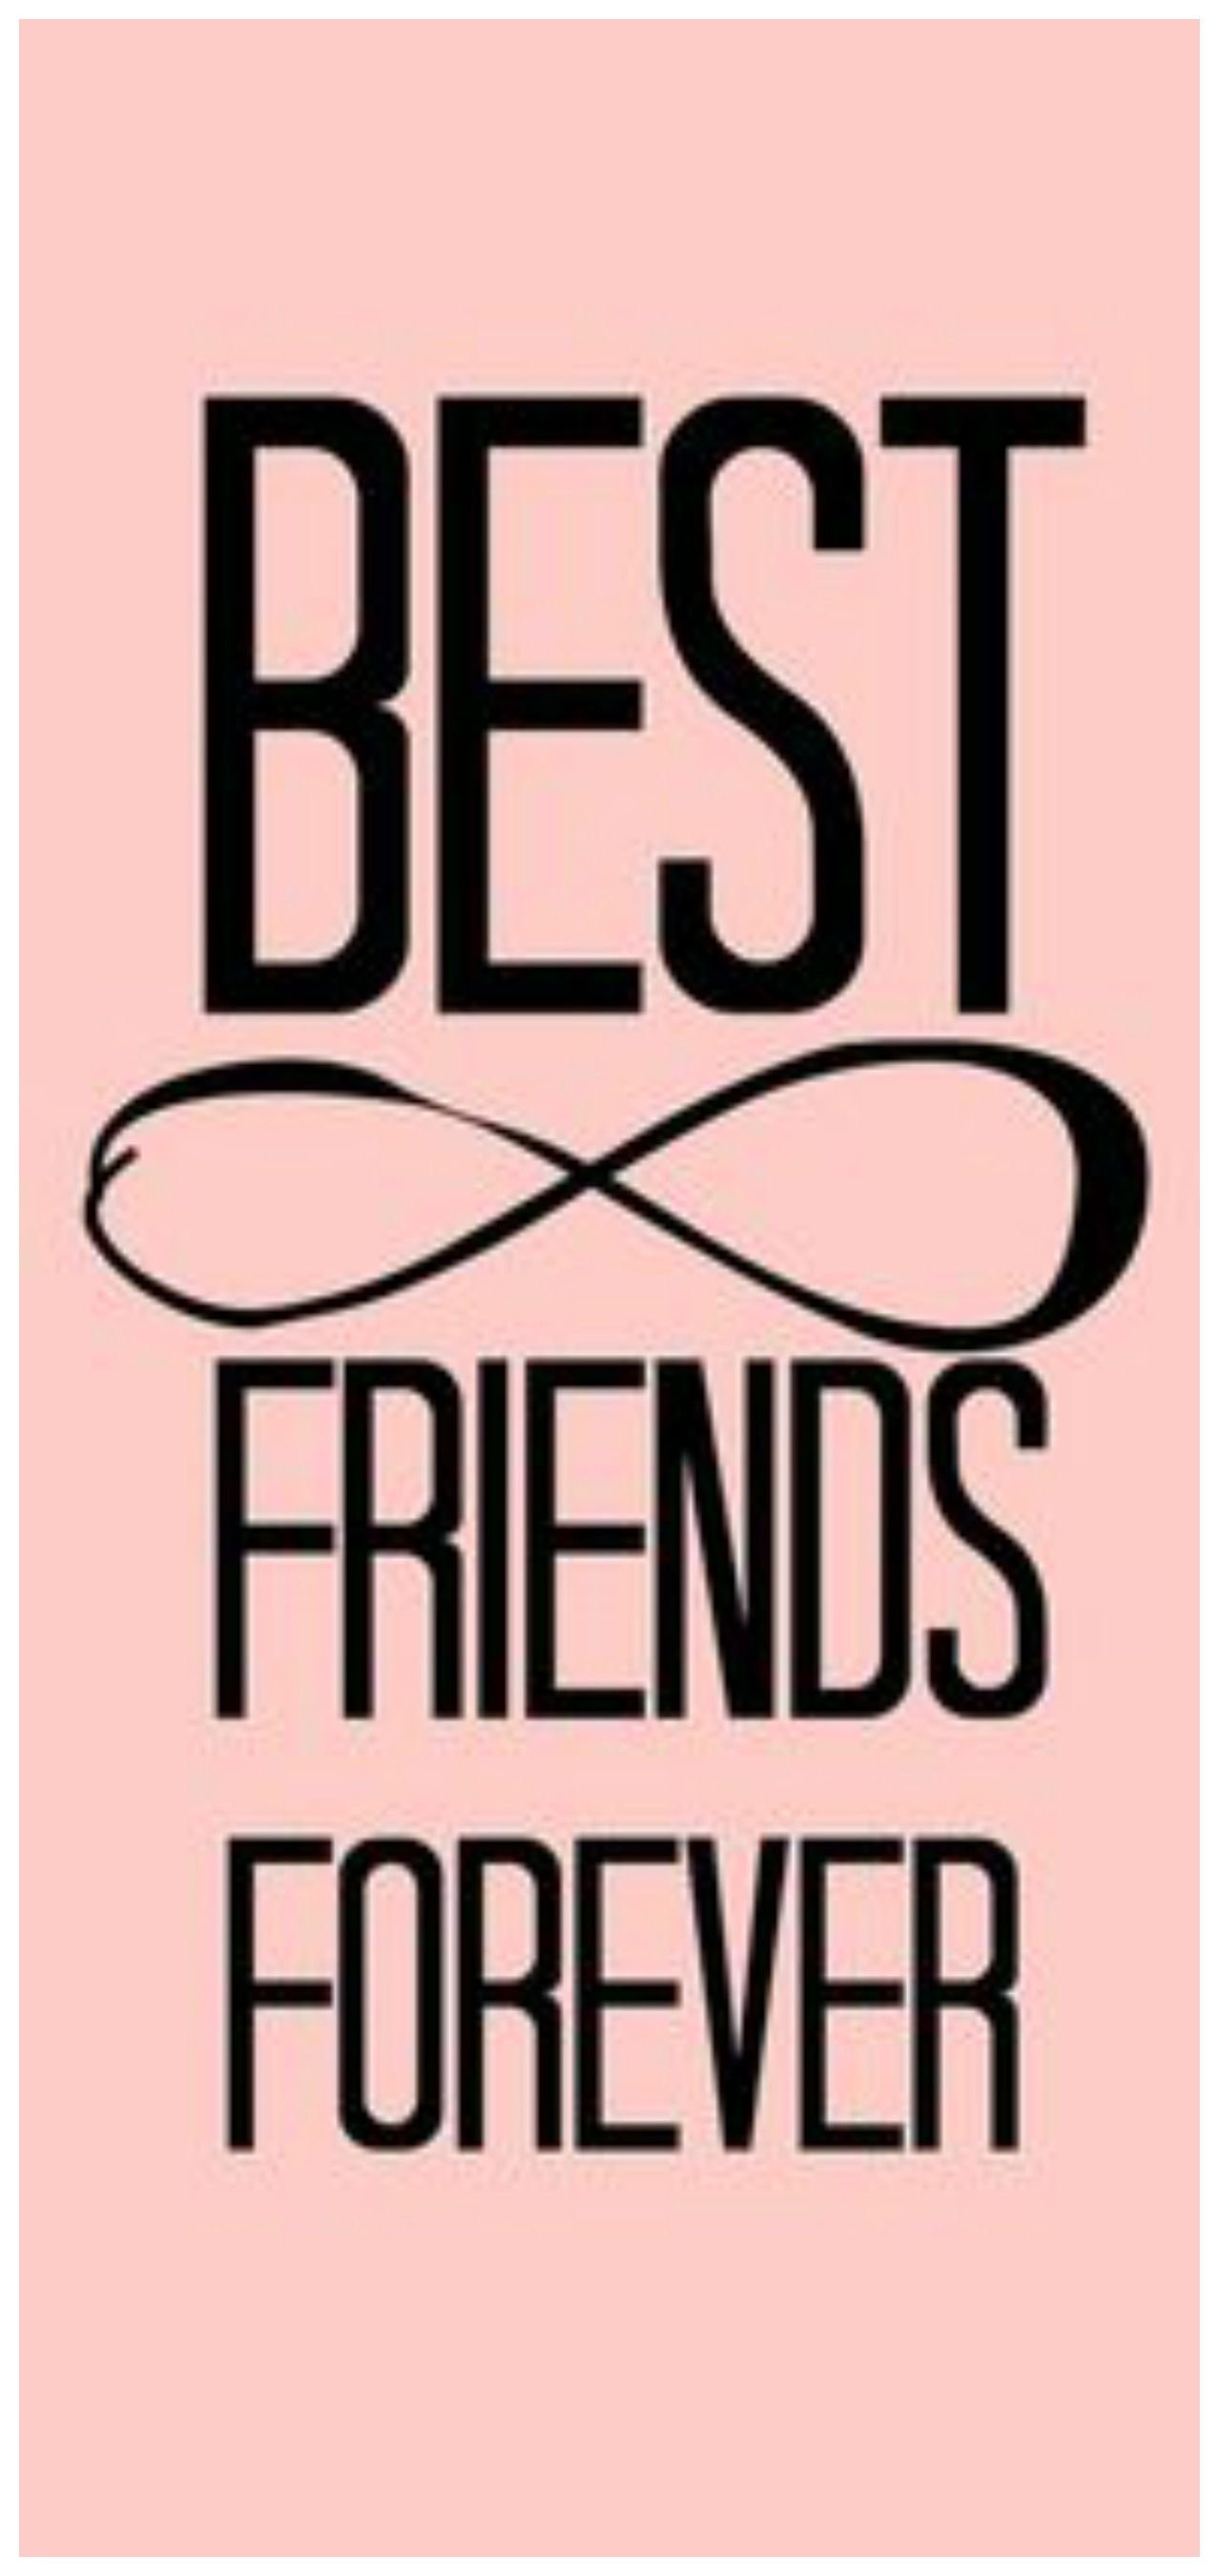 100 Friendship Quotes Wallpapers  Wallpaperscom